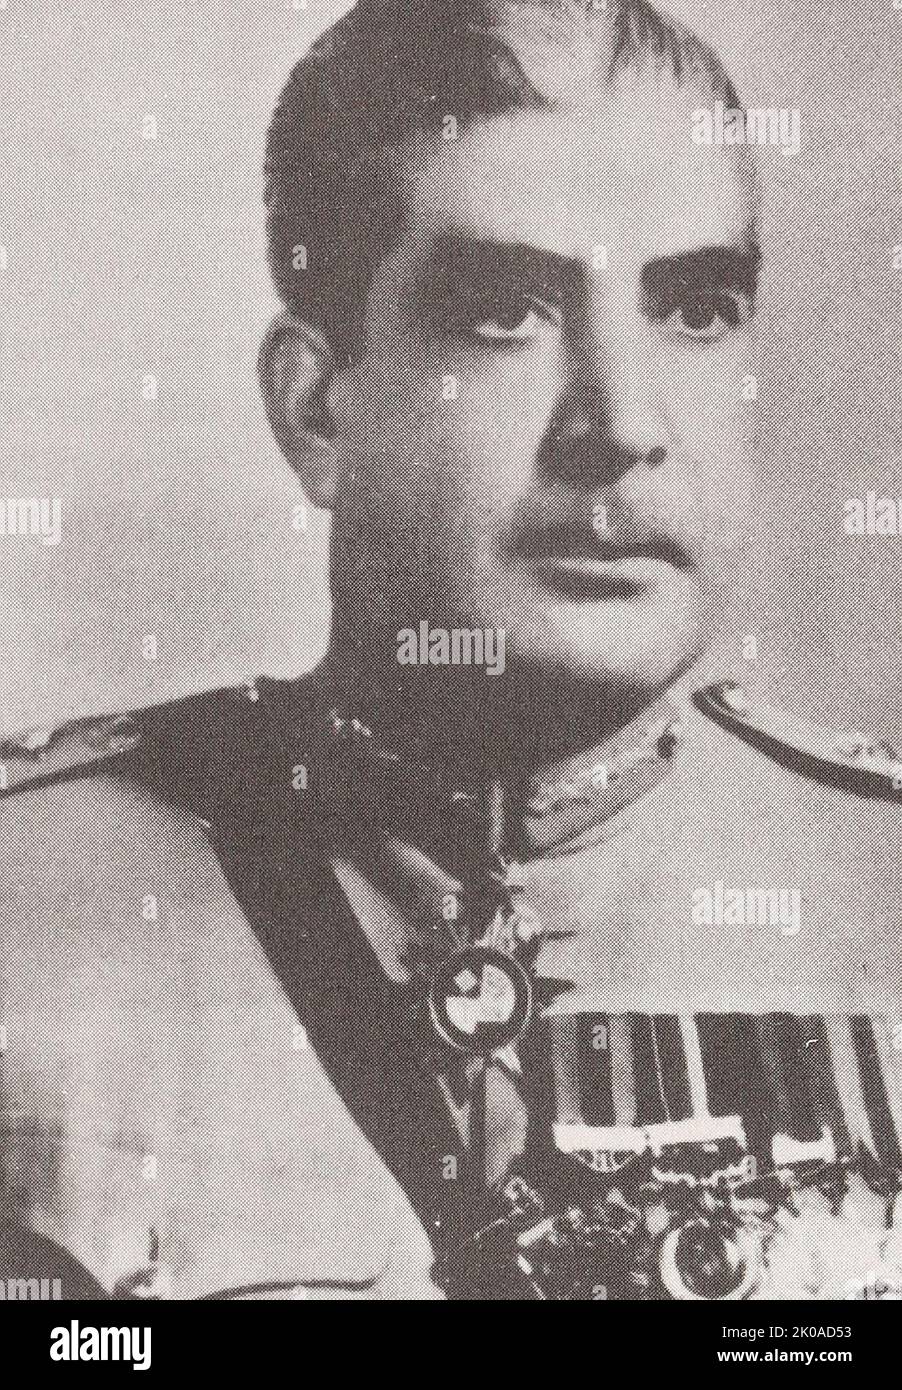 Agha Muhammad Yahya Khan (1917 - 1980), commonly known as Yahya Khan, was a Pakistani general who served as the third president of Pakistan from 25 March 1969 until December 1971 Stock Photo